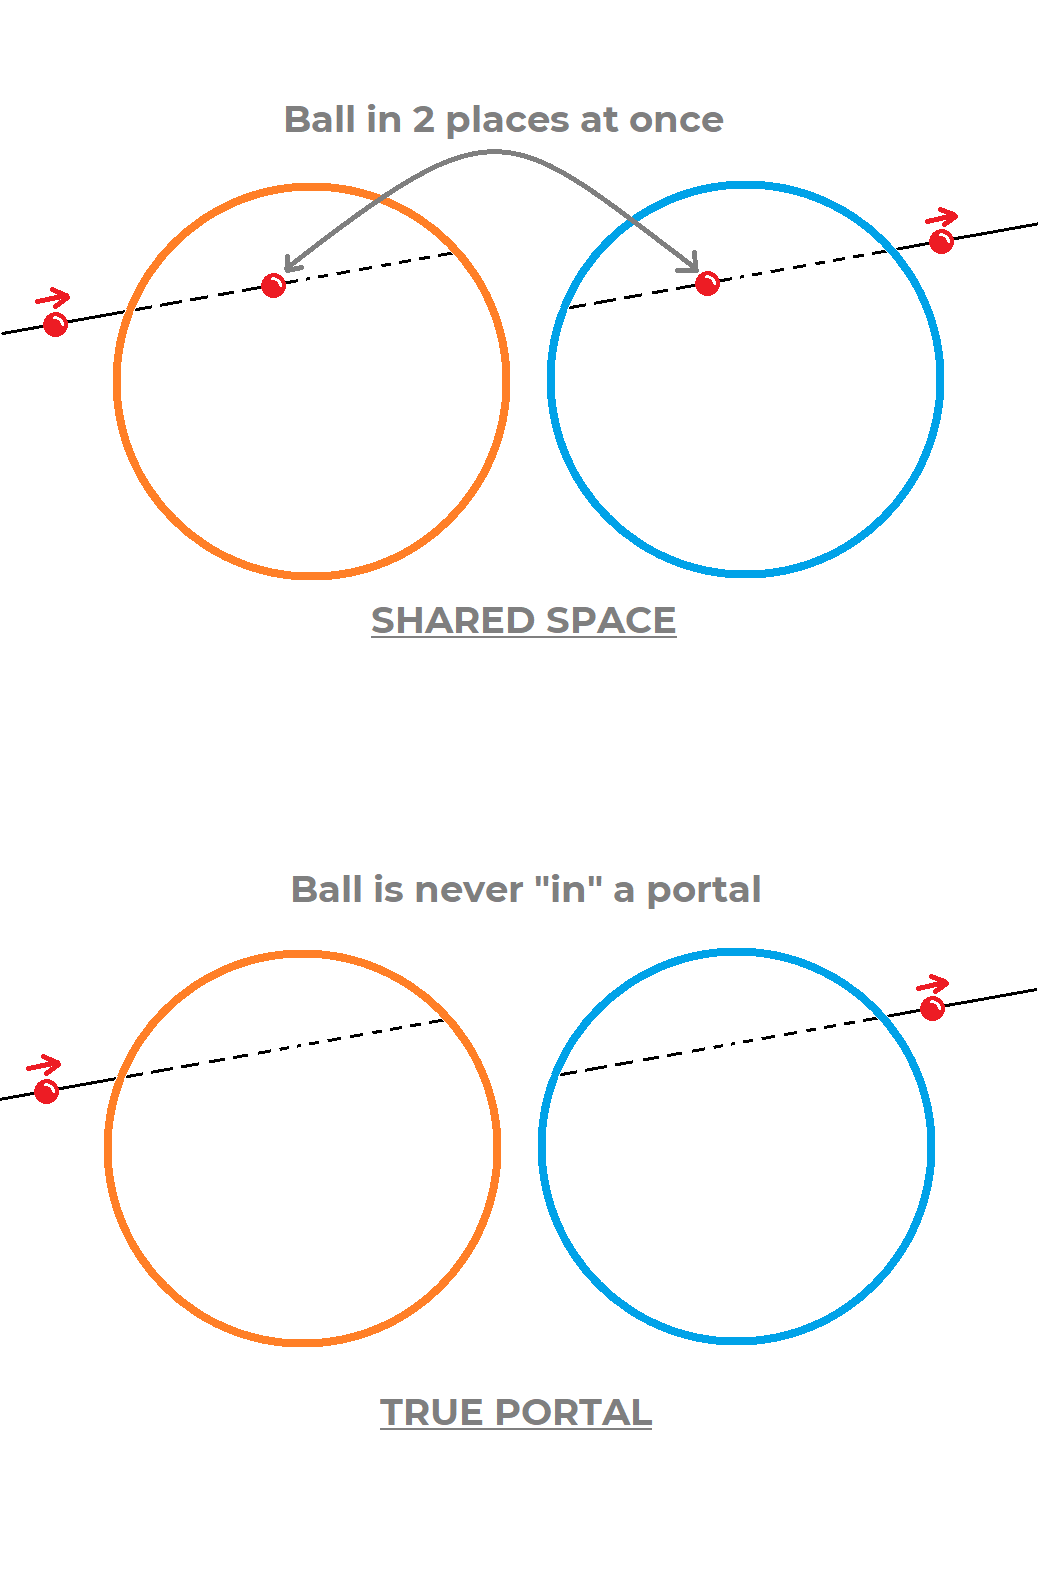 traversal as chords across a circle vs shared space